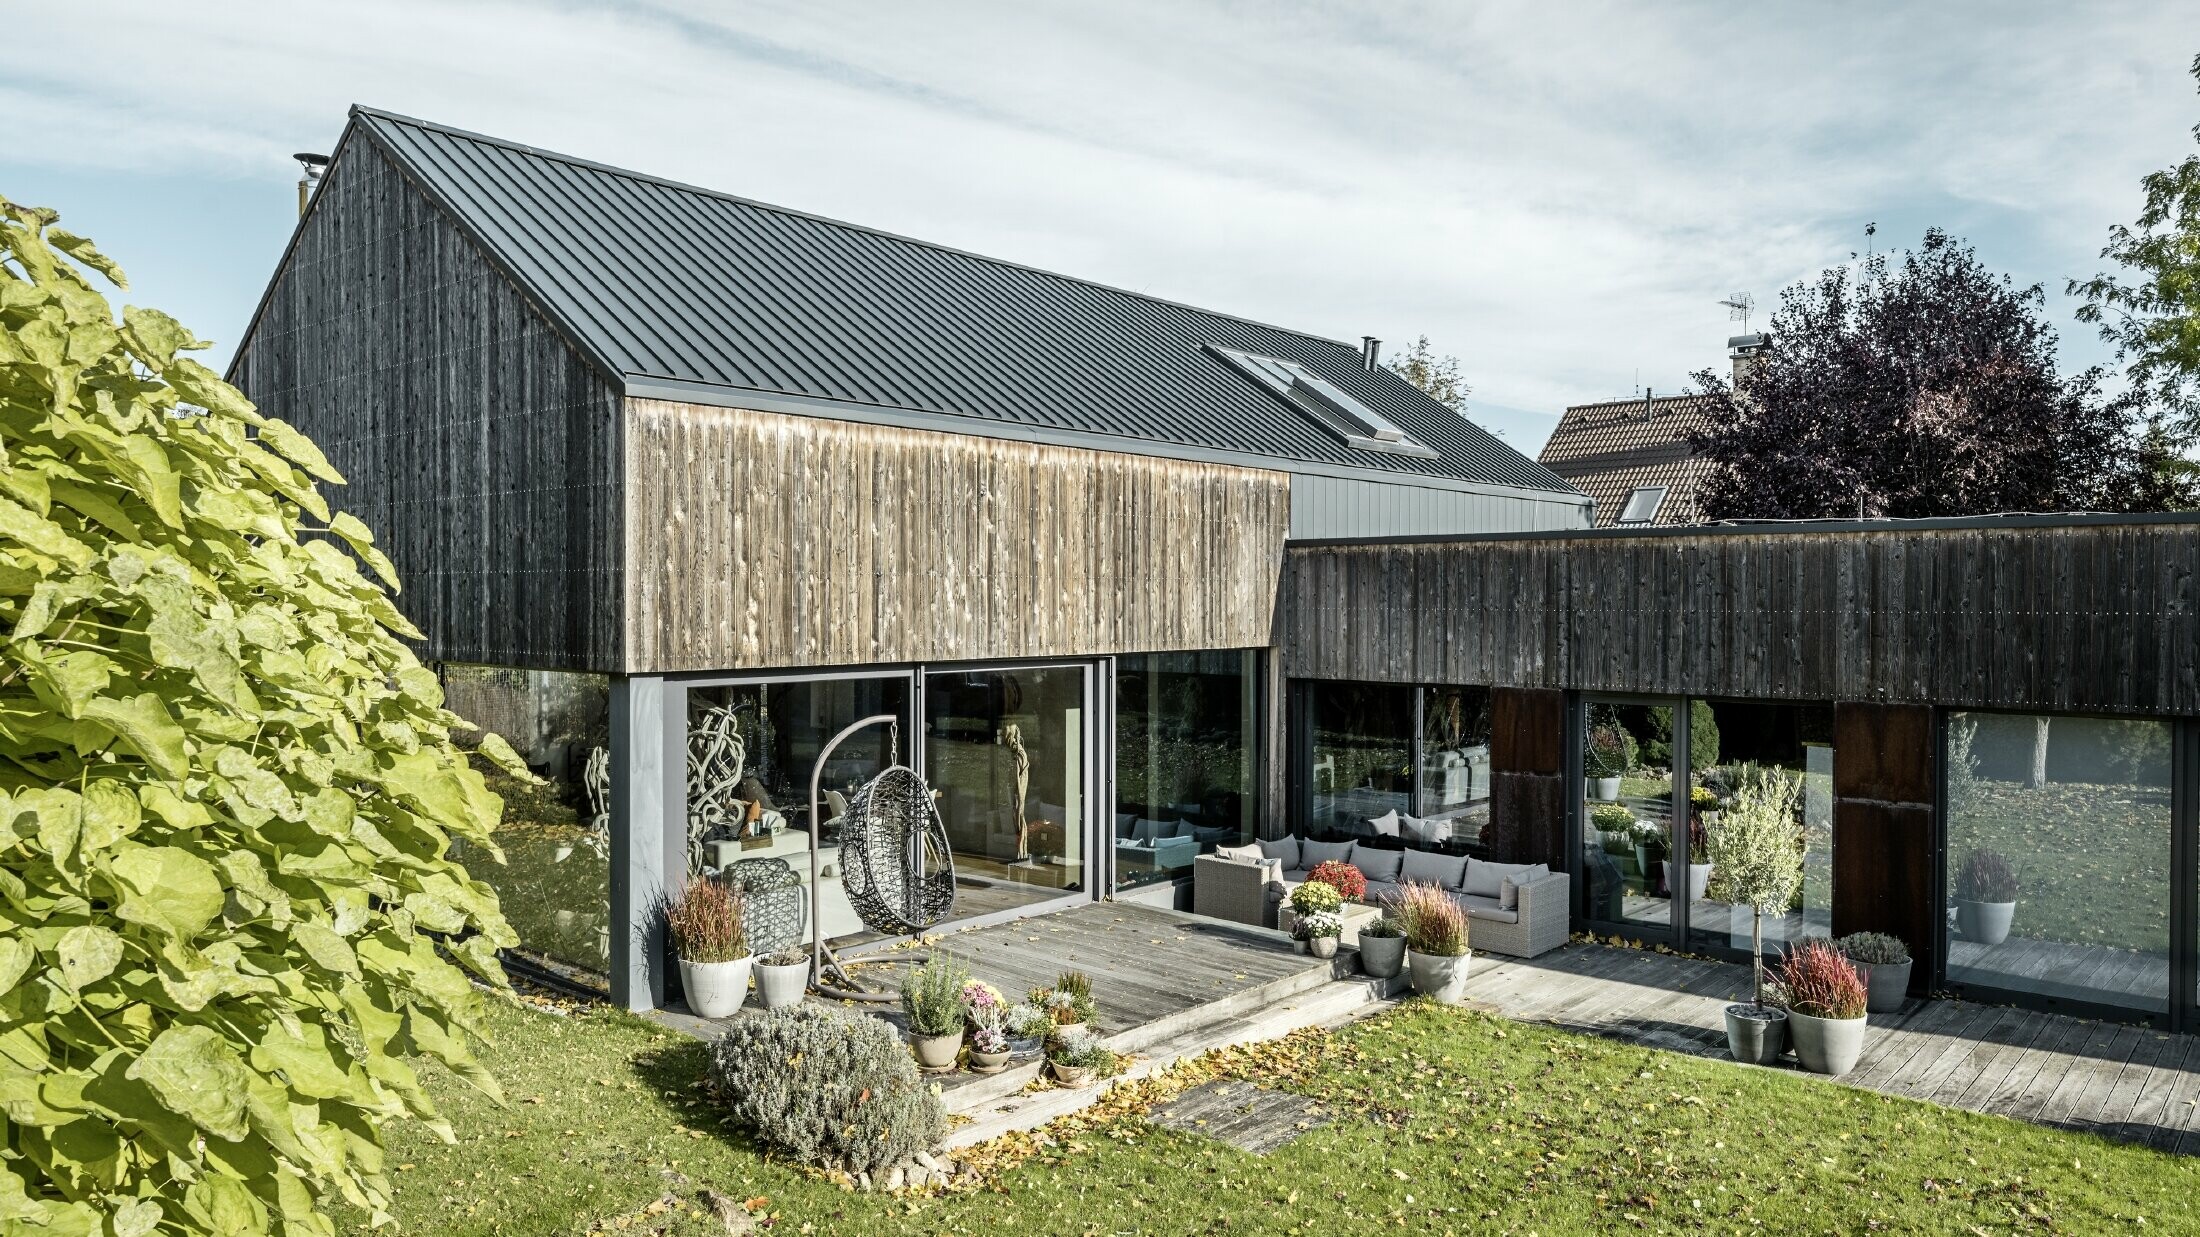 Detached house with gable roof, covered with PREFALZ double standing seam in anthracite and weathered wooden façade. With a beautiful wooden terrace and large windows on the ground floor.